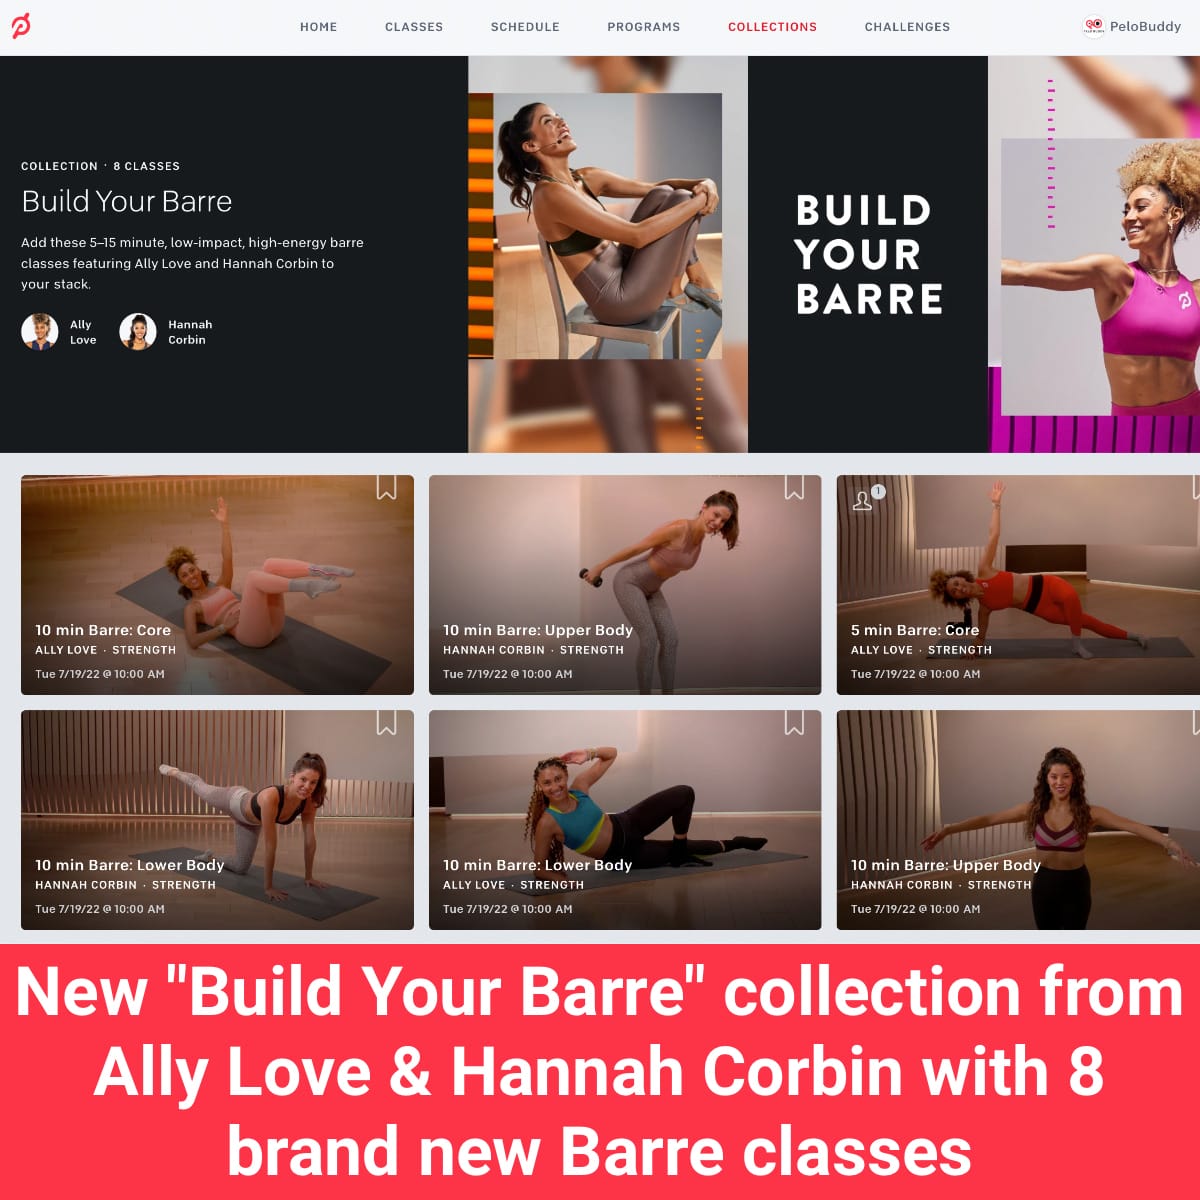 Peloton Releases New Collection - Build Your Barre Classes with Hannah  Corbin and Ally Love - Peloton Buddy